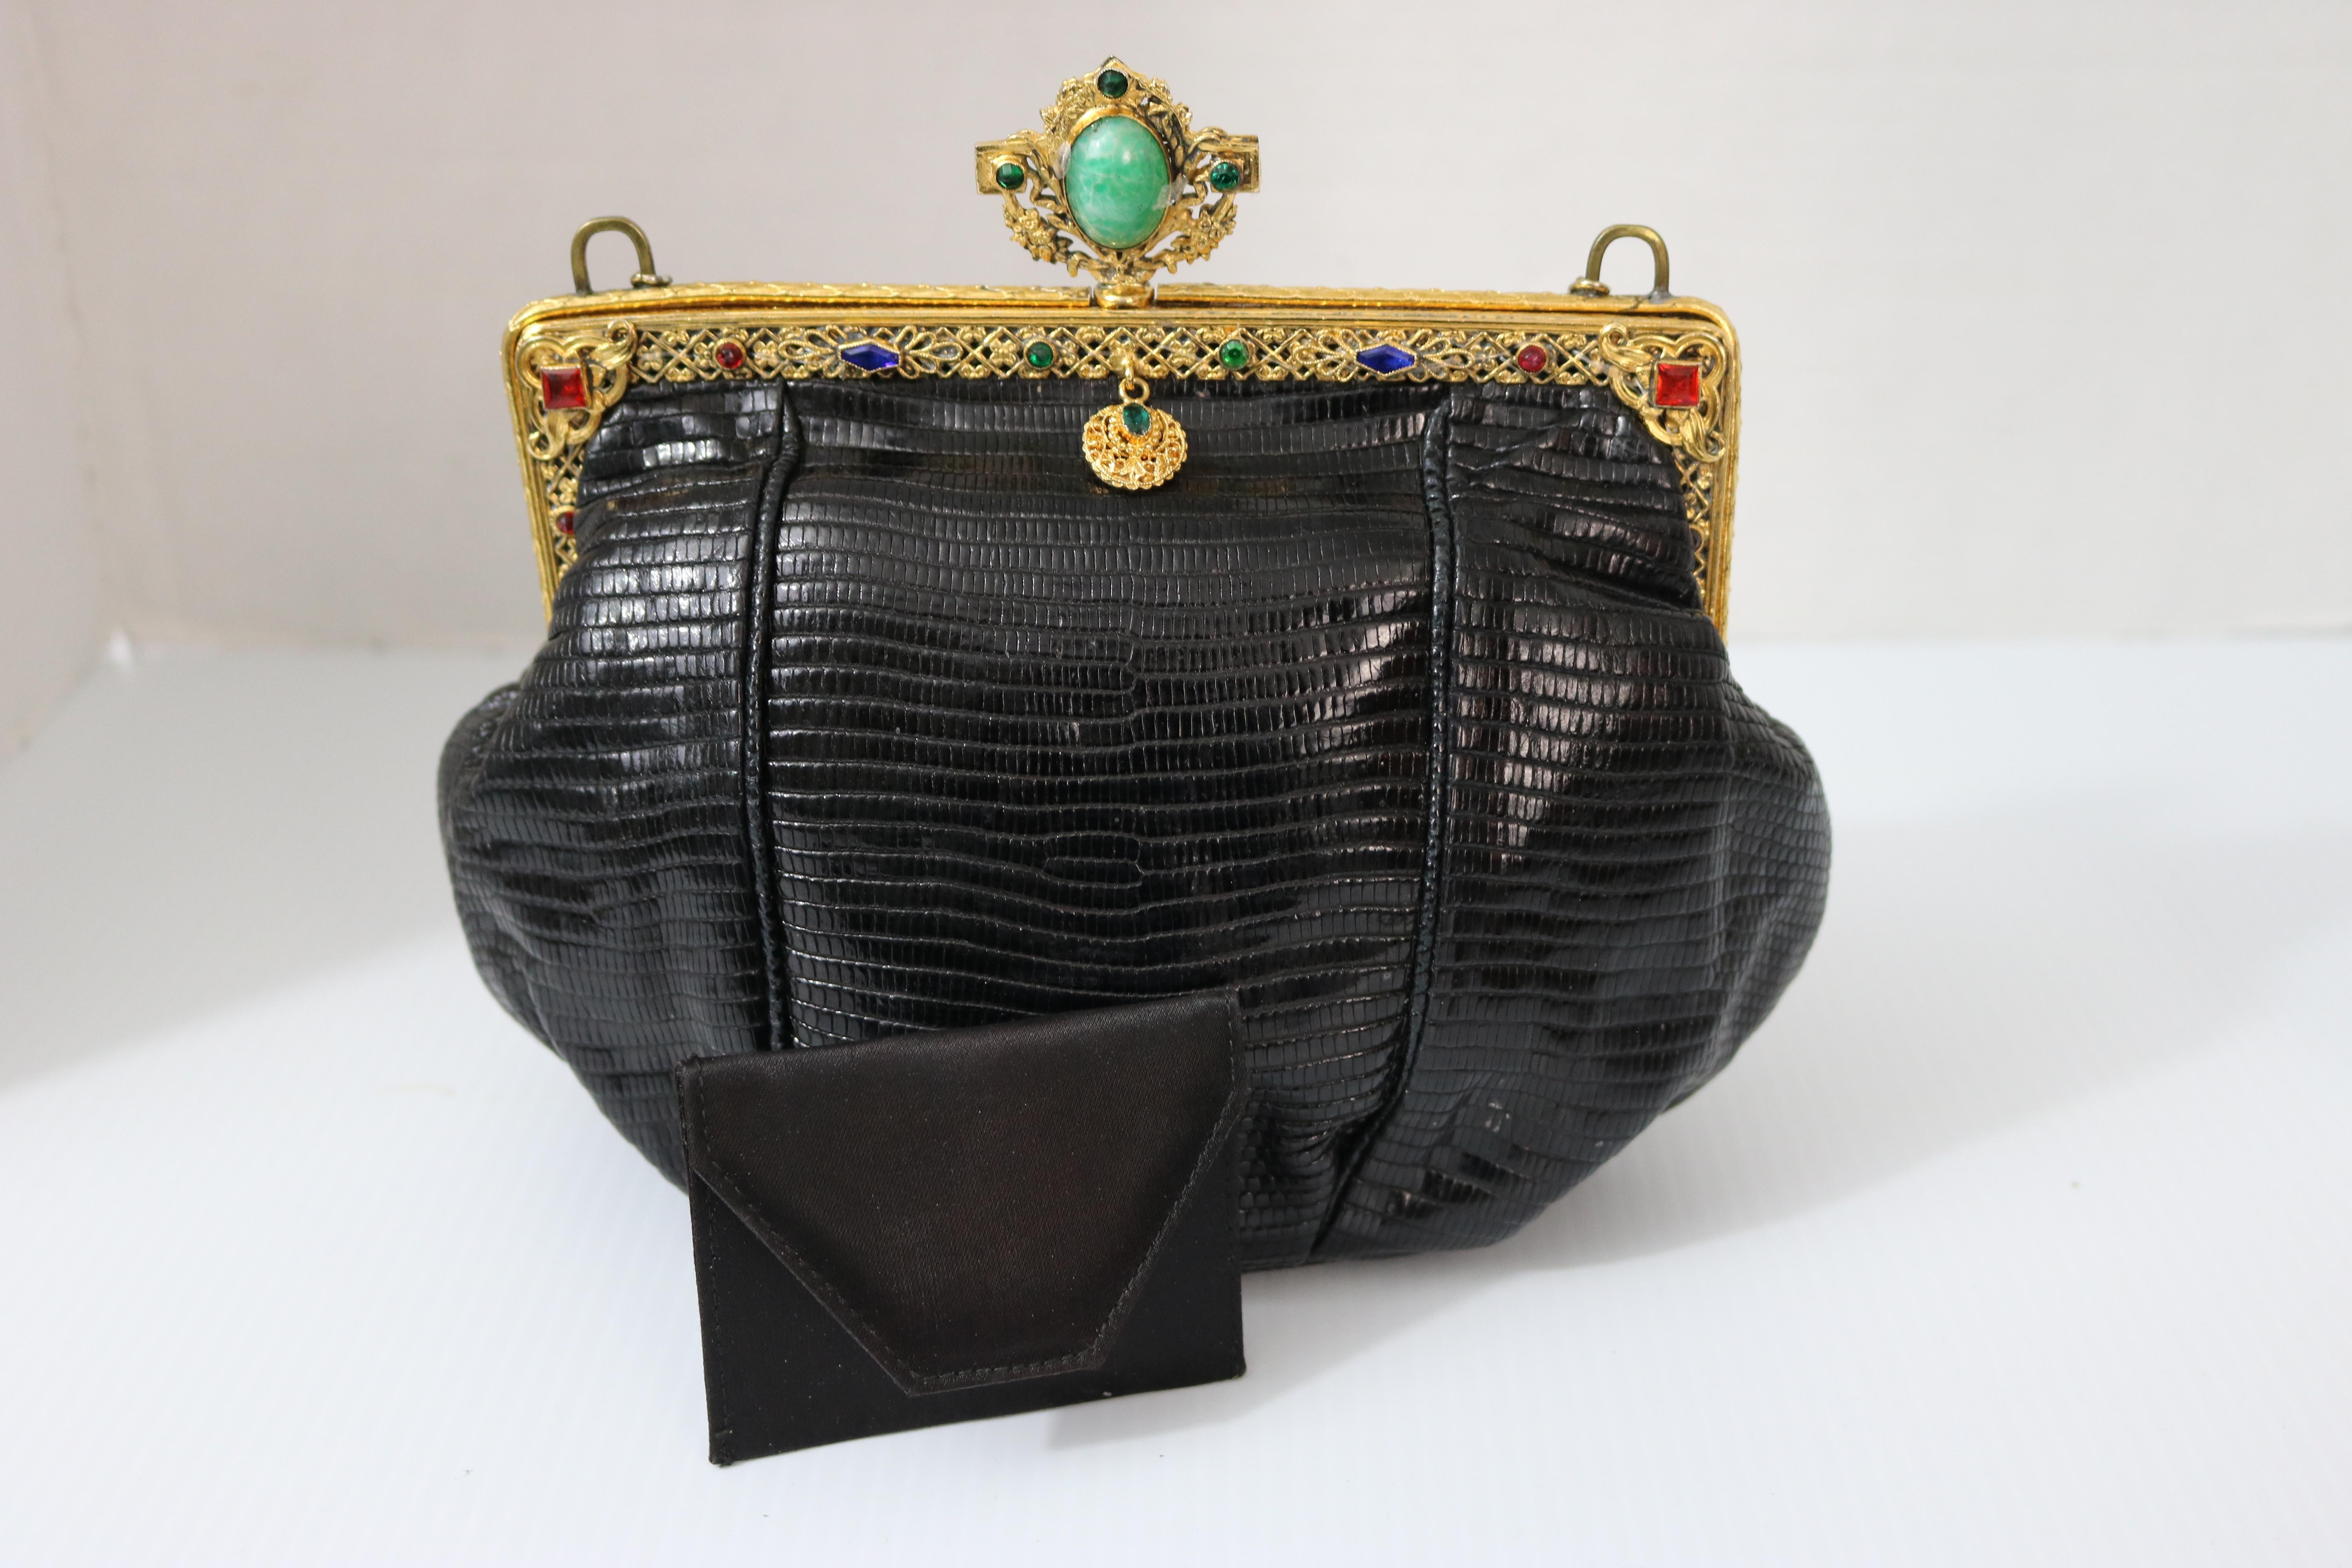 Jeweled 22K Gold Plate c.1925 Handbag Frame Black Lizard Evening Bag , a Treasure In Good Condition For Sale In West Palm Beach, FL